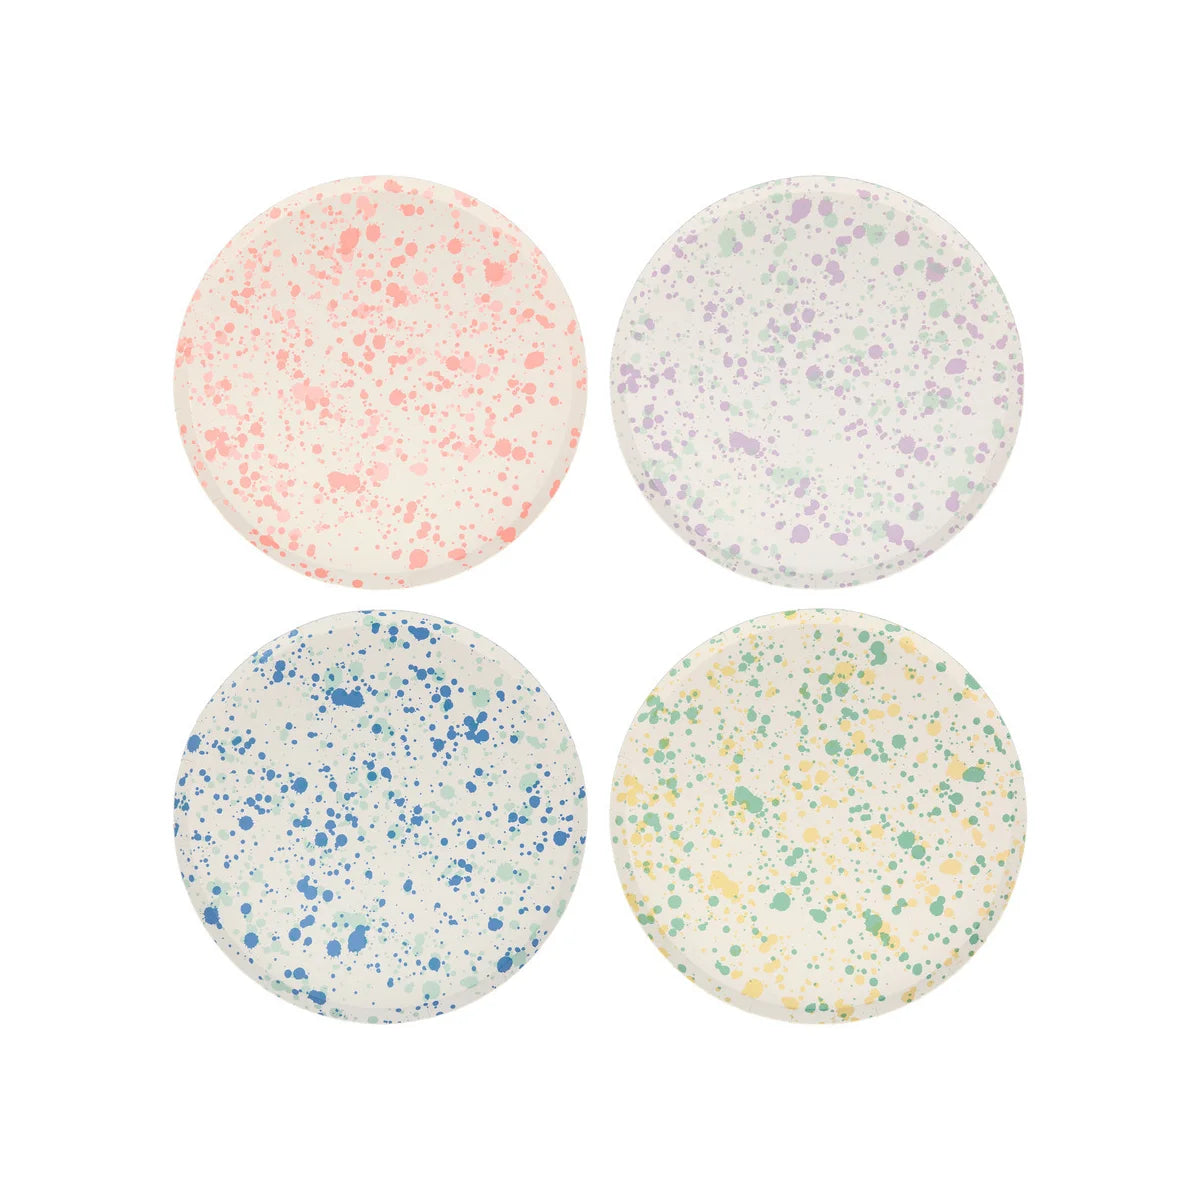 Speckled side plates in pink, purple, green and blue, sold at ALittleConfetti. By Meri Meri